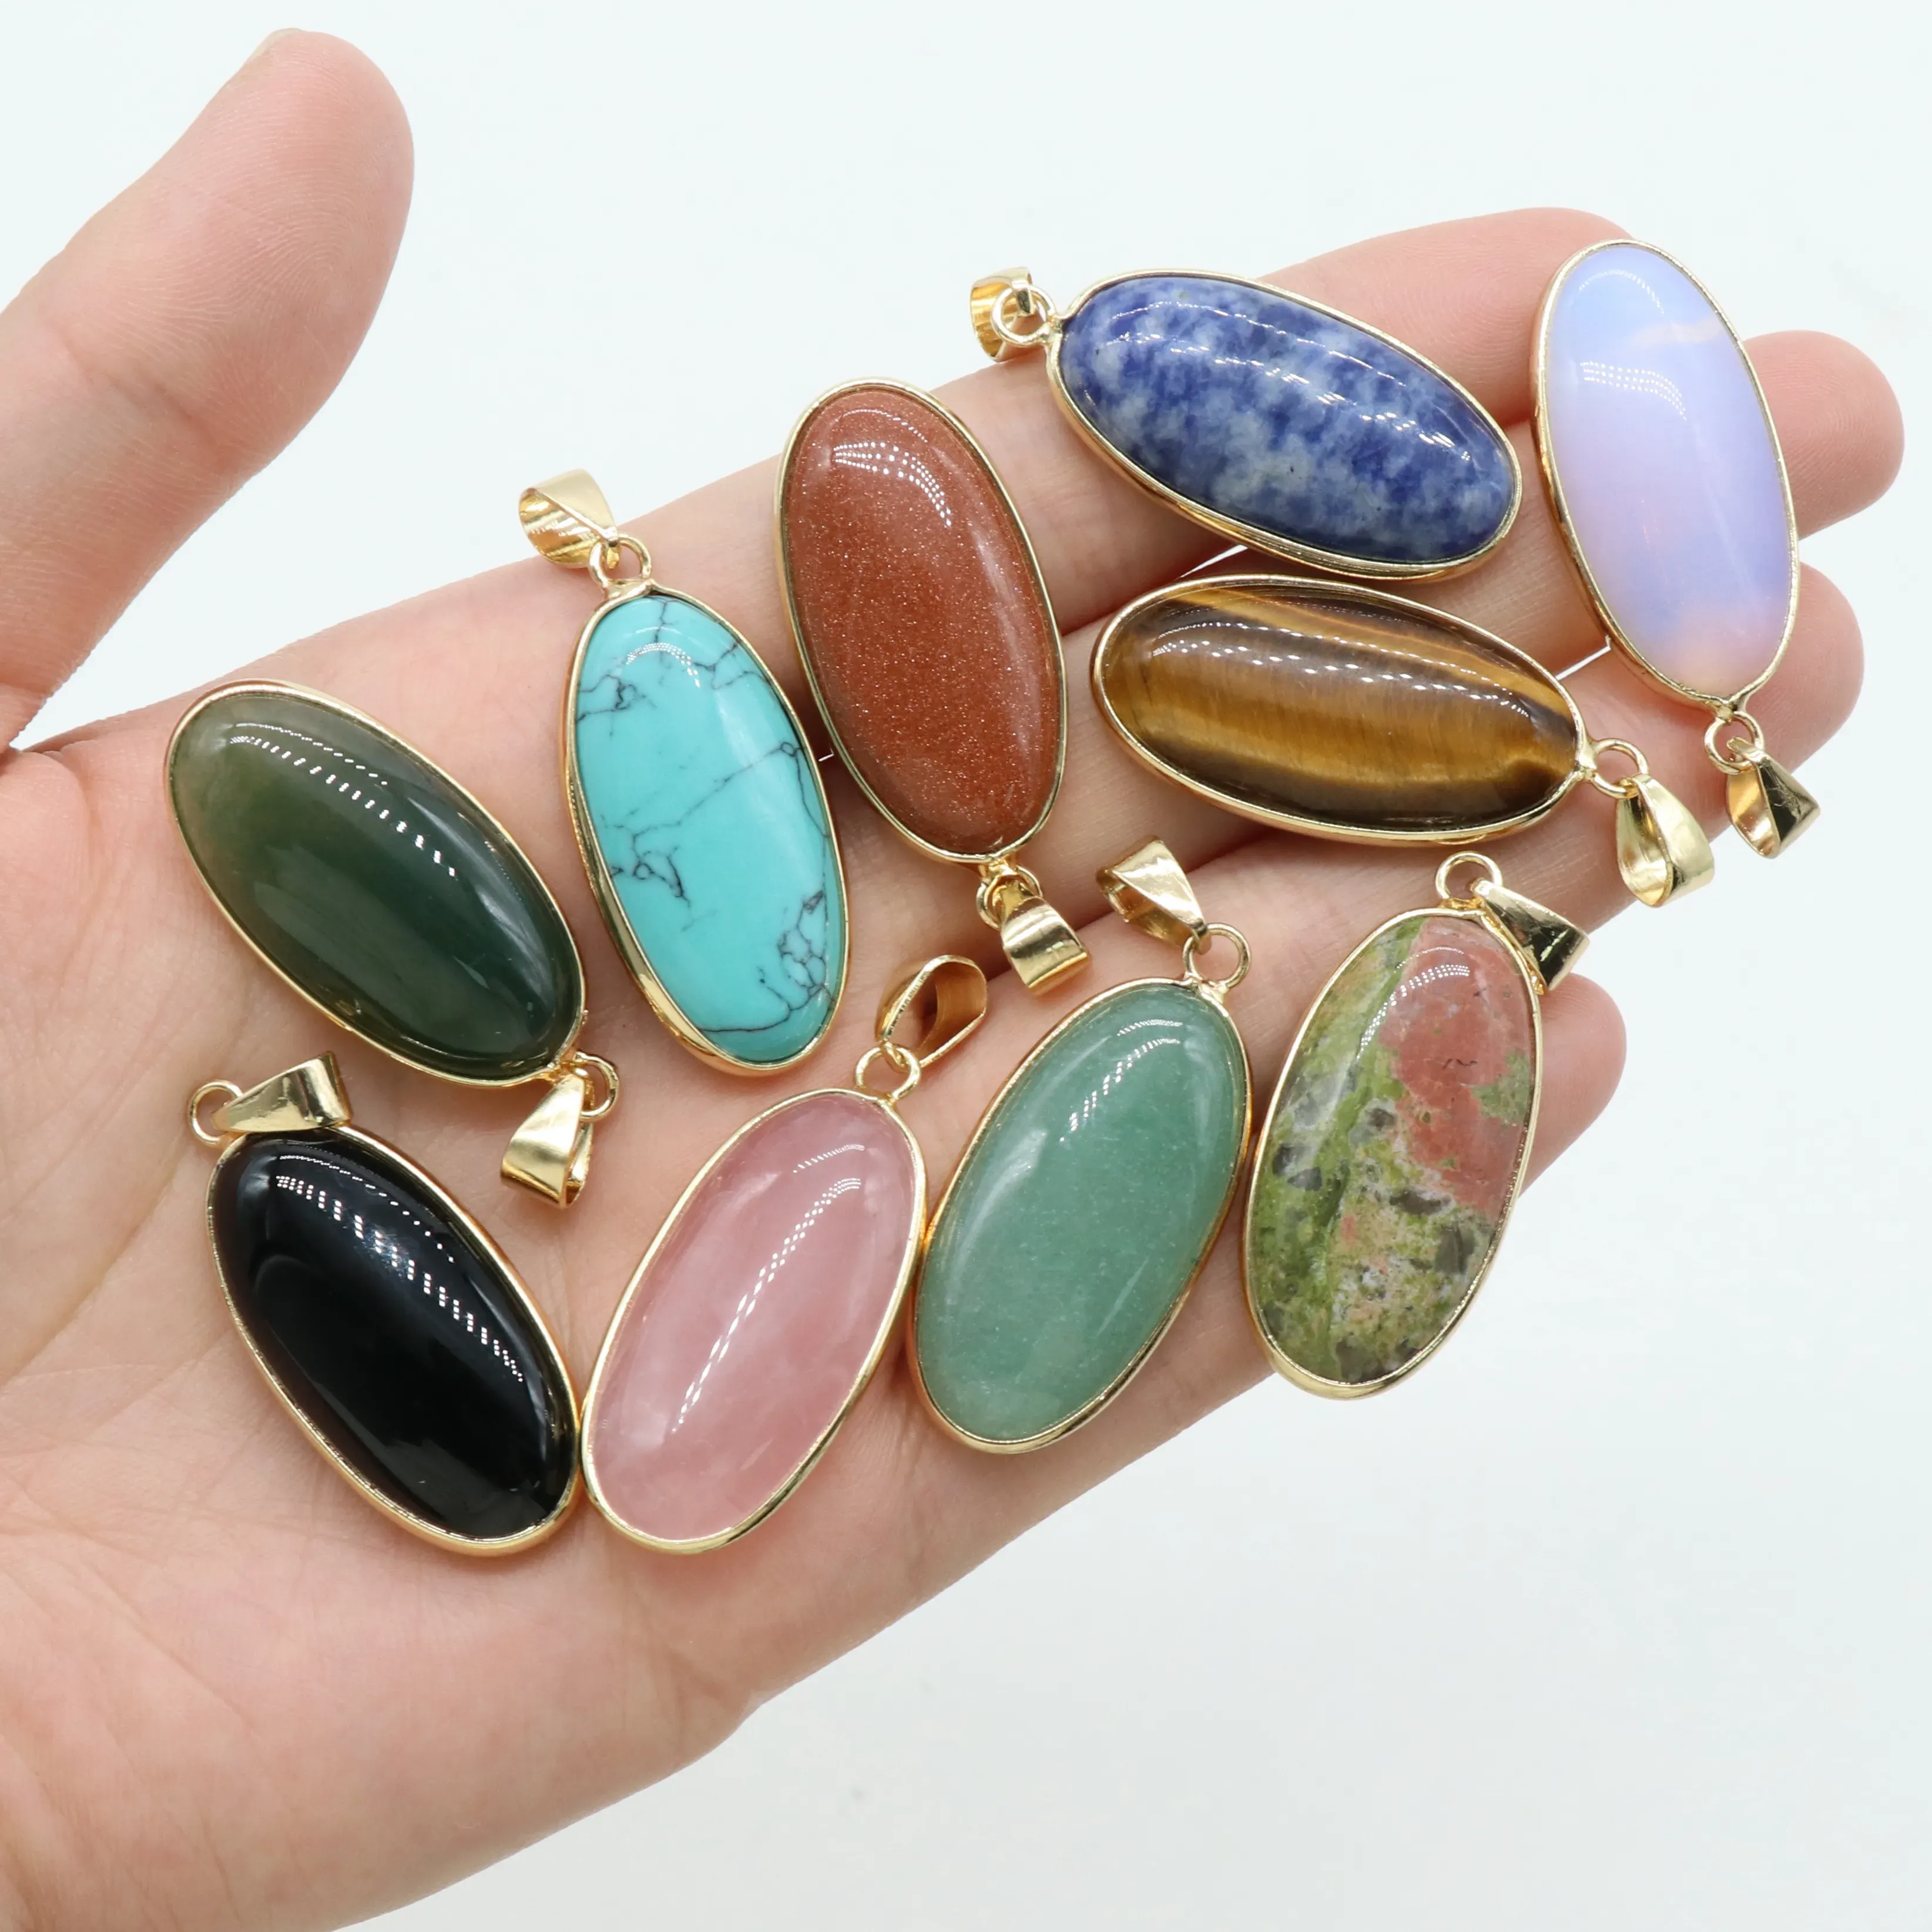 natural stone pendants waterdrop shape mixed stone agate tiger eye chakra healing stones charms for jewelry making necklace bracelet